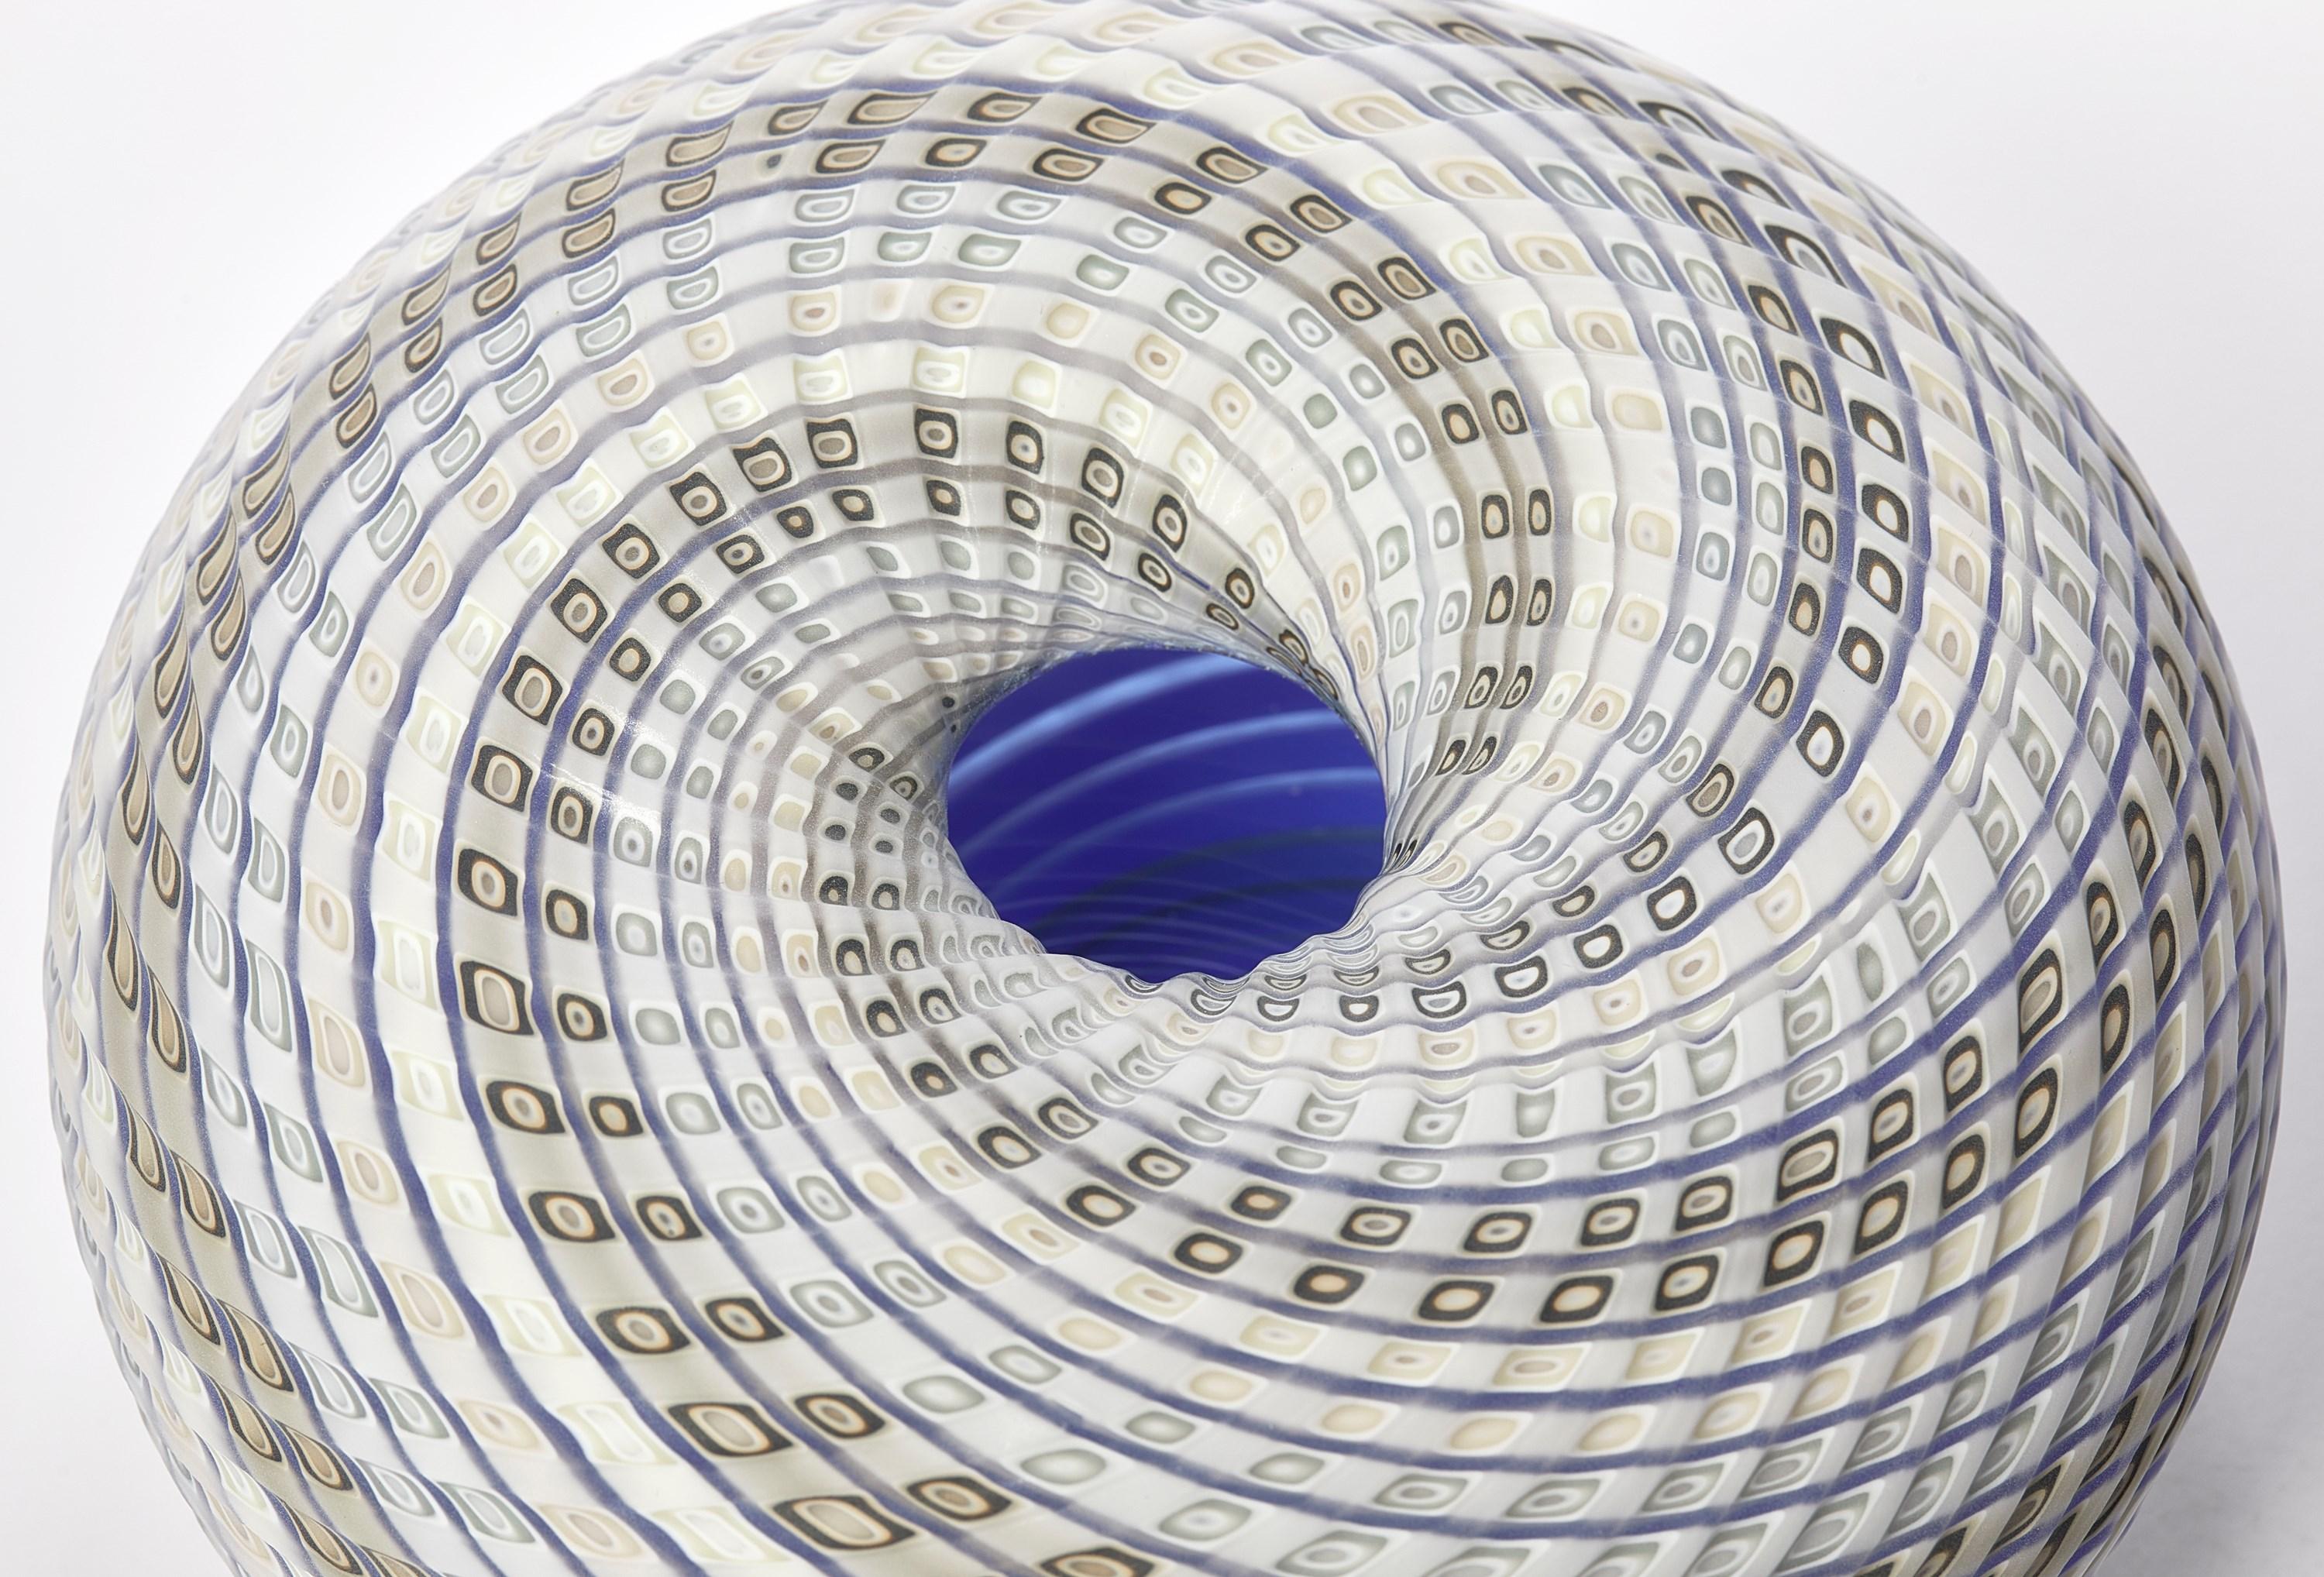 Organic Modern Woven Three Tone Blue Basket, textured glass sculptural object by Layne Rowe For Sale